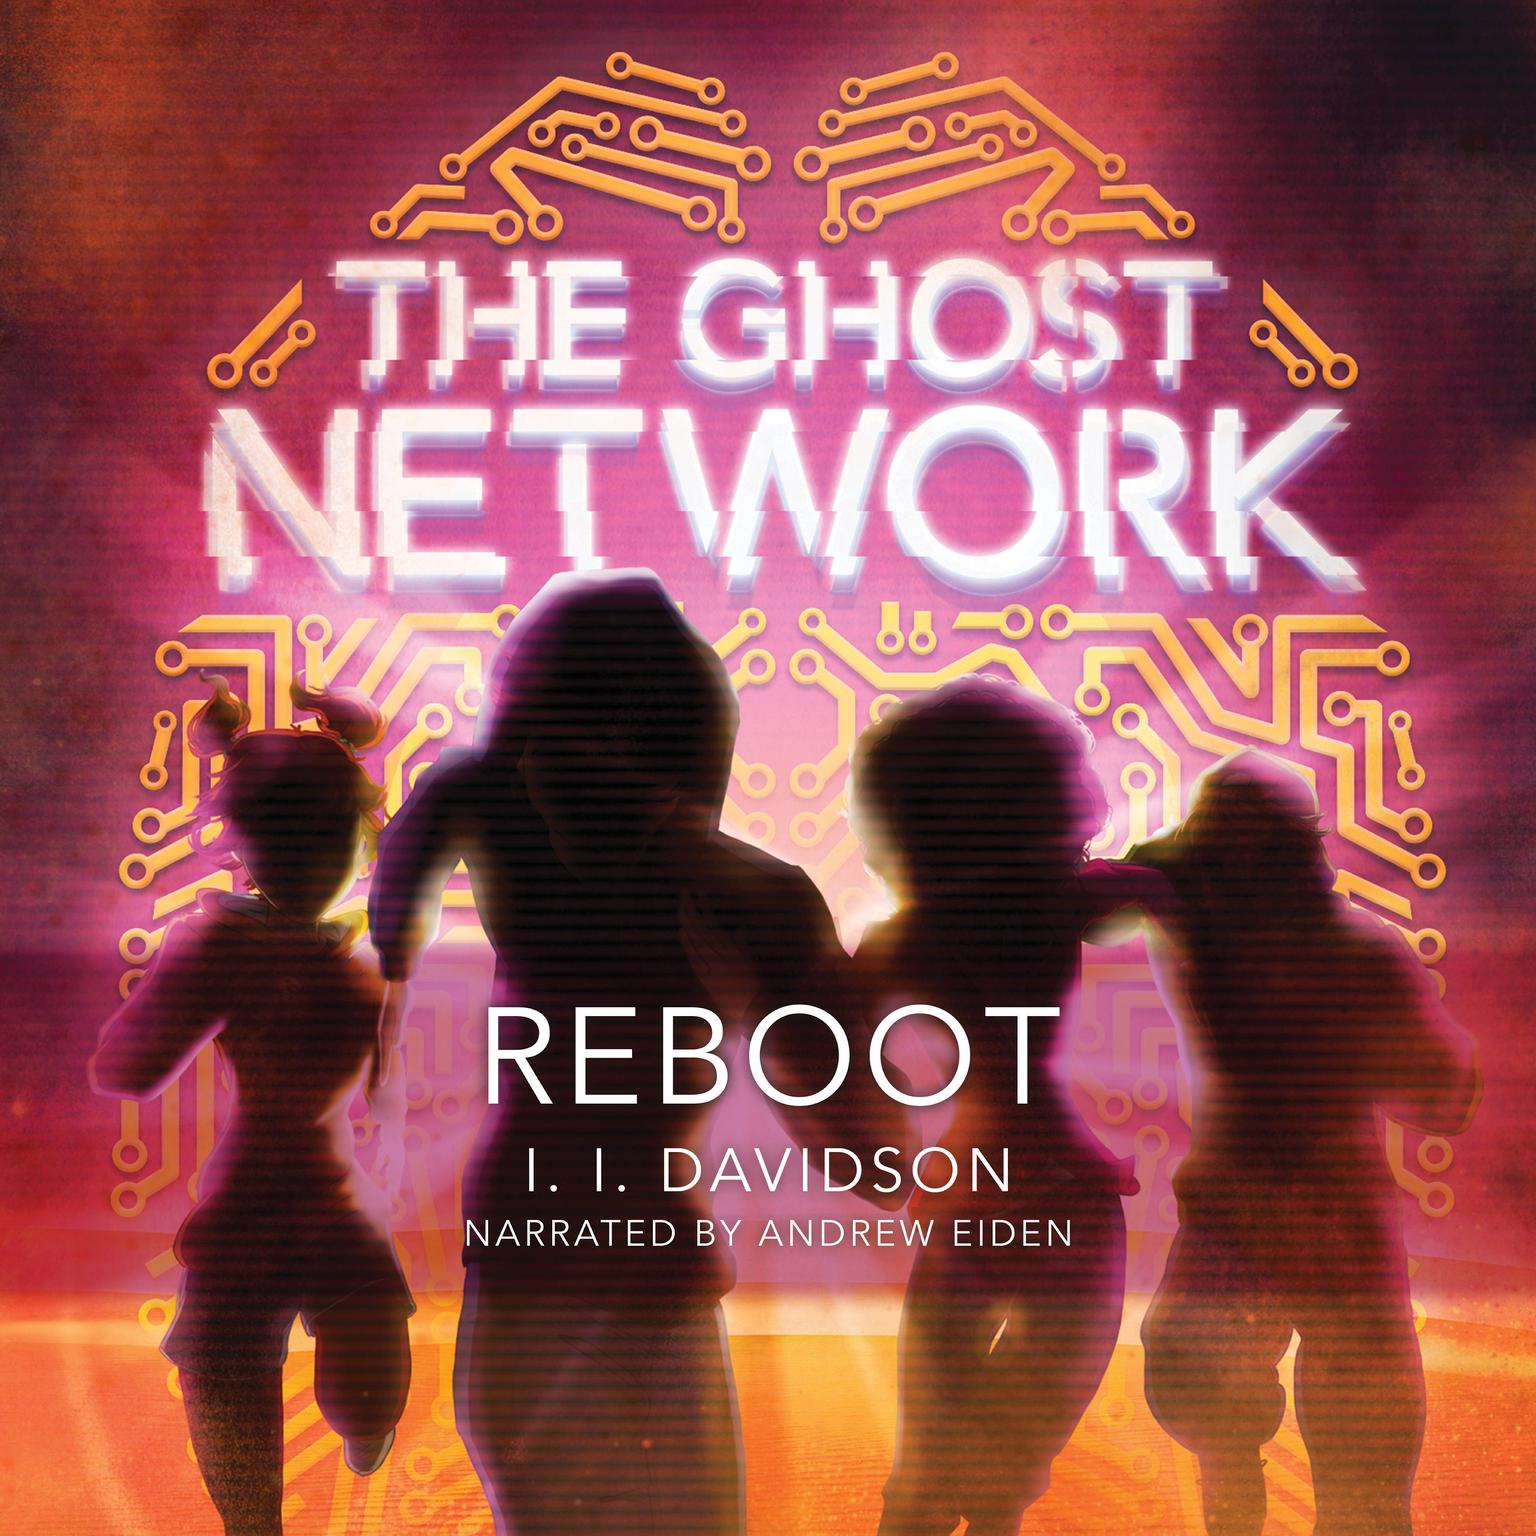 The Ghost Network: Reboot Audiobook, by I.I Davidson